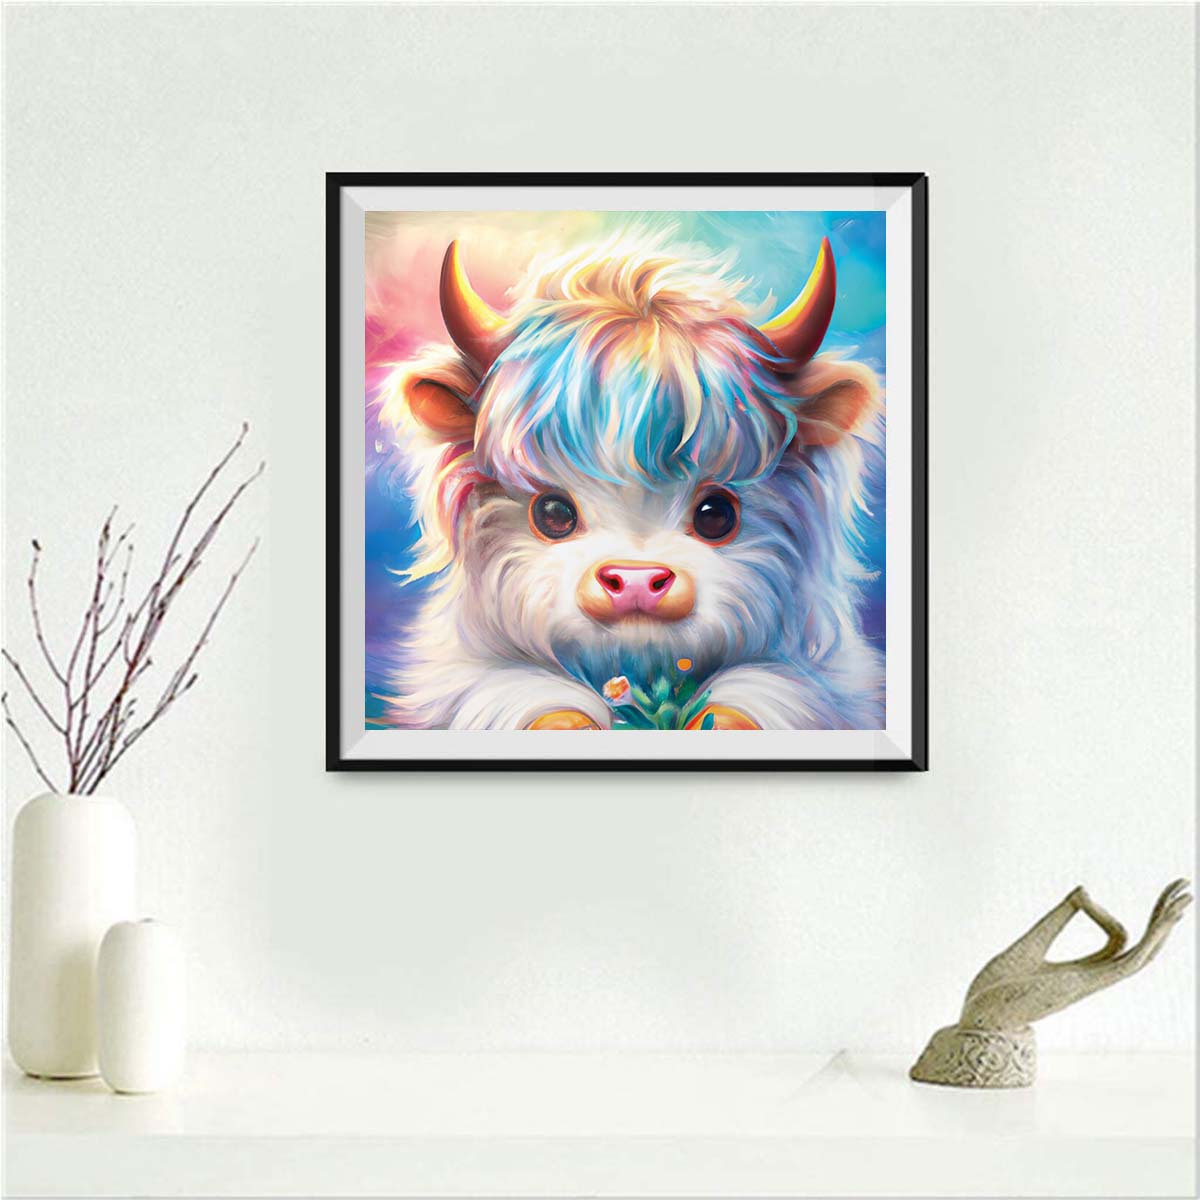 5D Diamond Painting Art Animal Highland Cow Garland Full Drill Diamond Painting by Number Kits for Adult Wall Decoration (40x40cm/16x16inch)